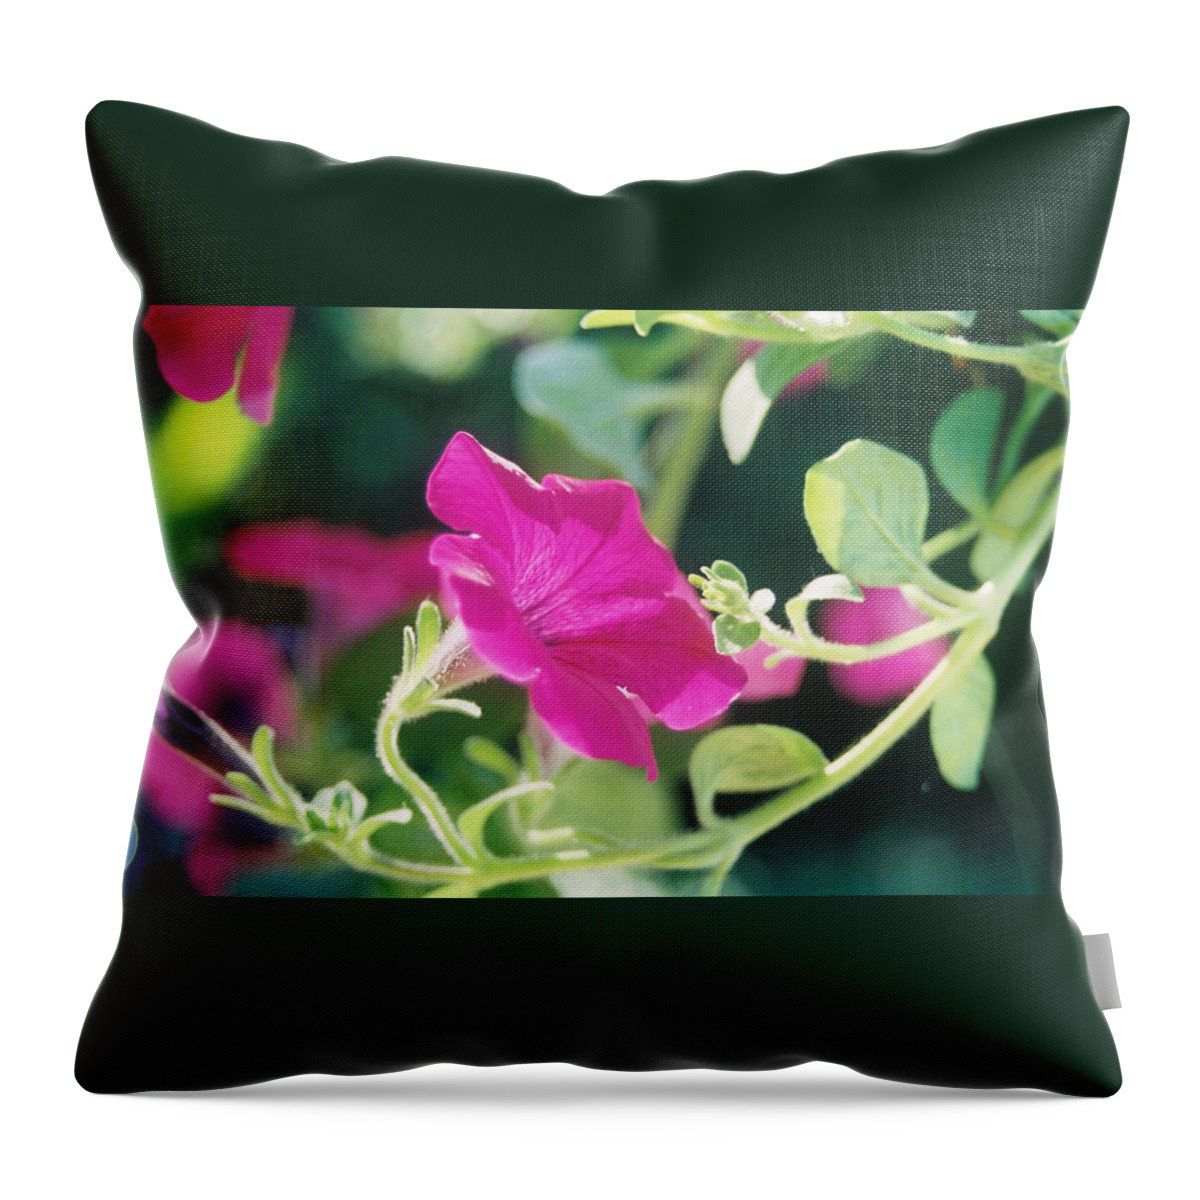 Flowers Throw Pillow featuring the photograph Early Morning Petunias by Alan Lakin